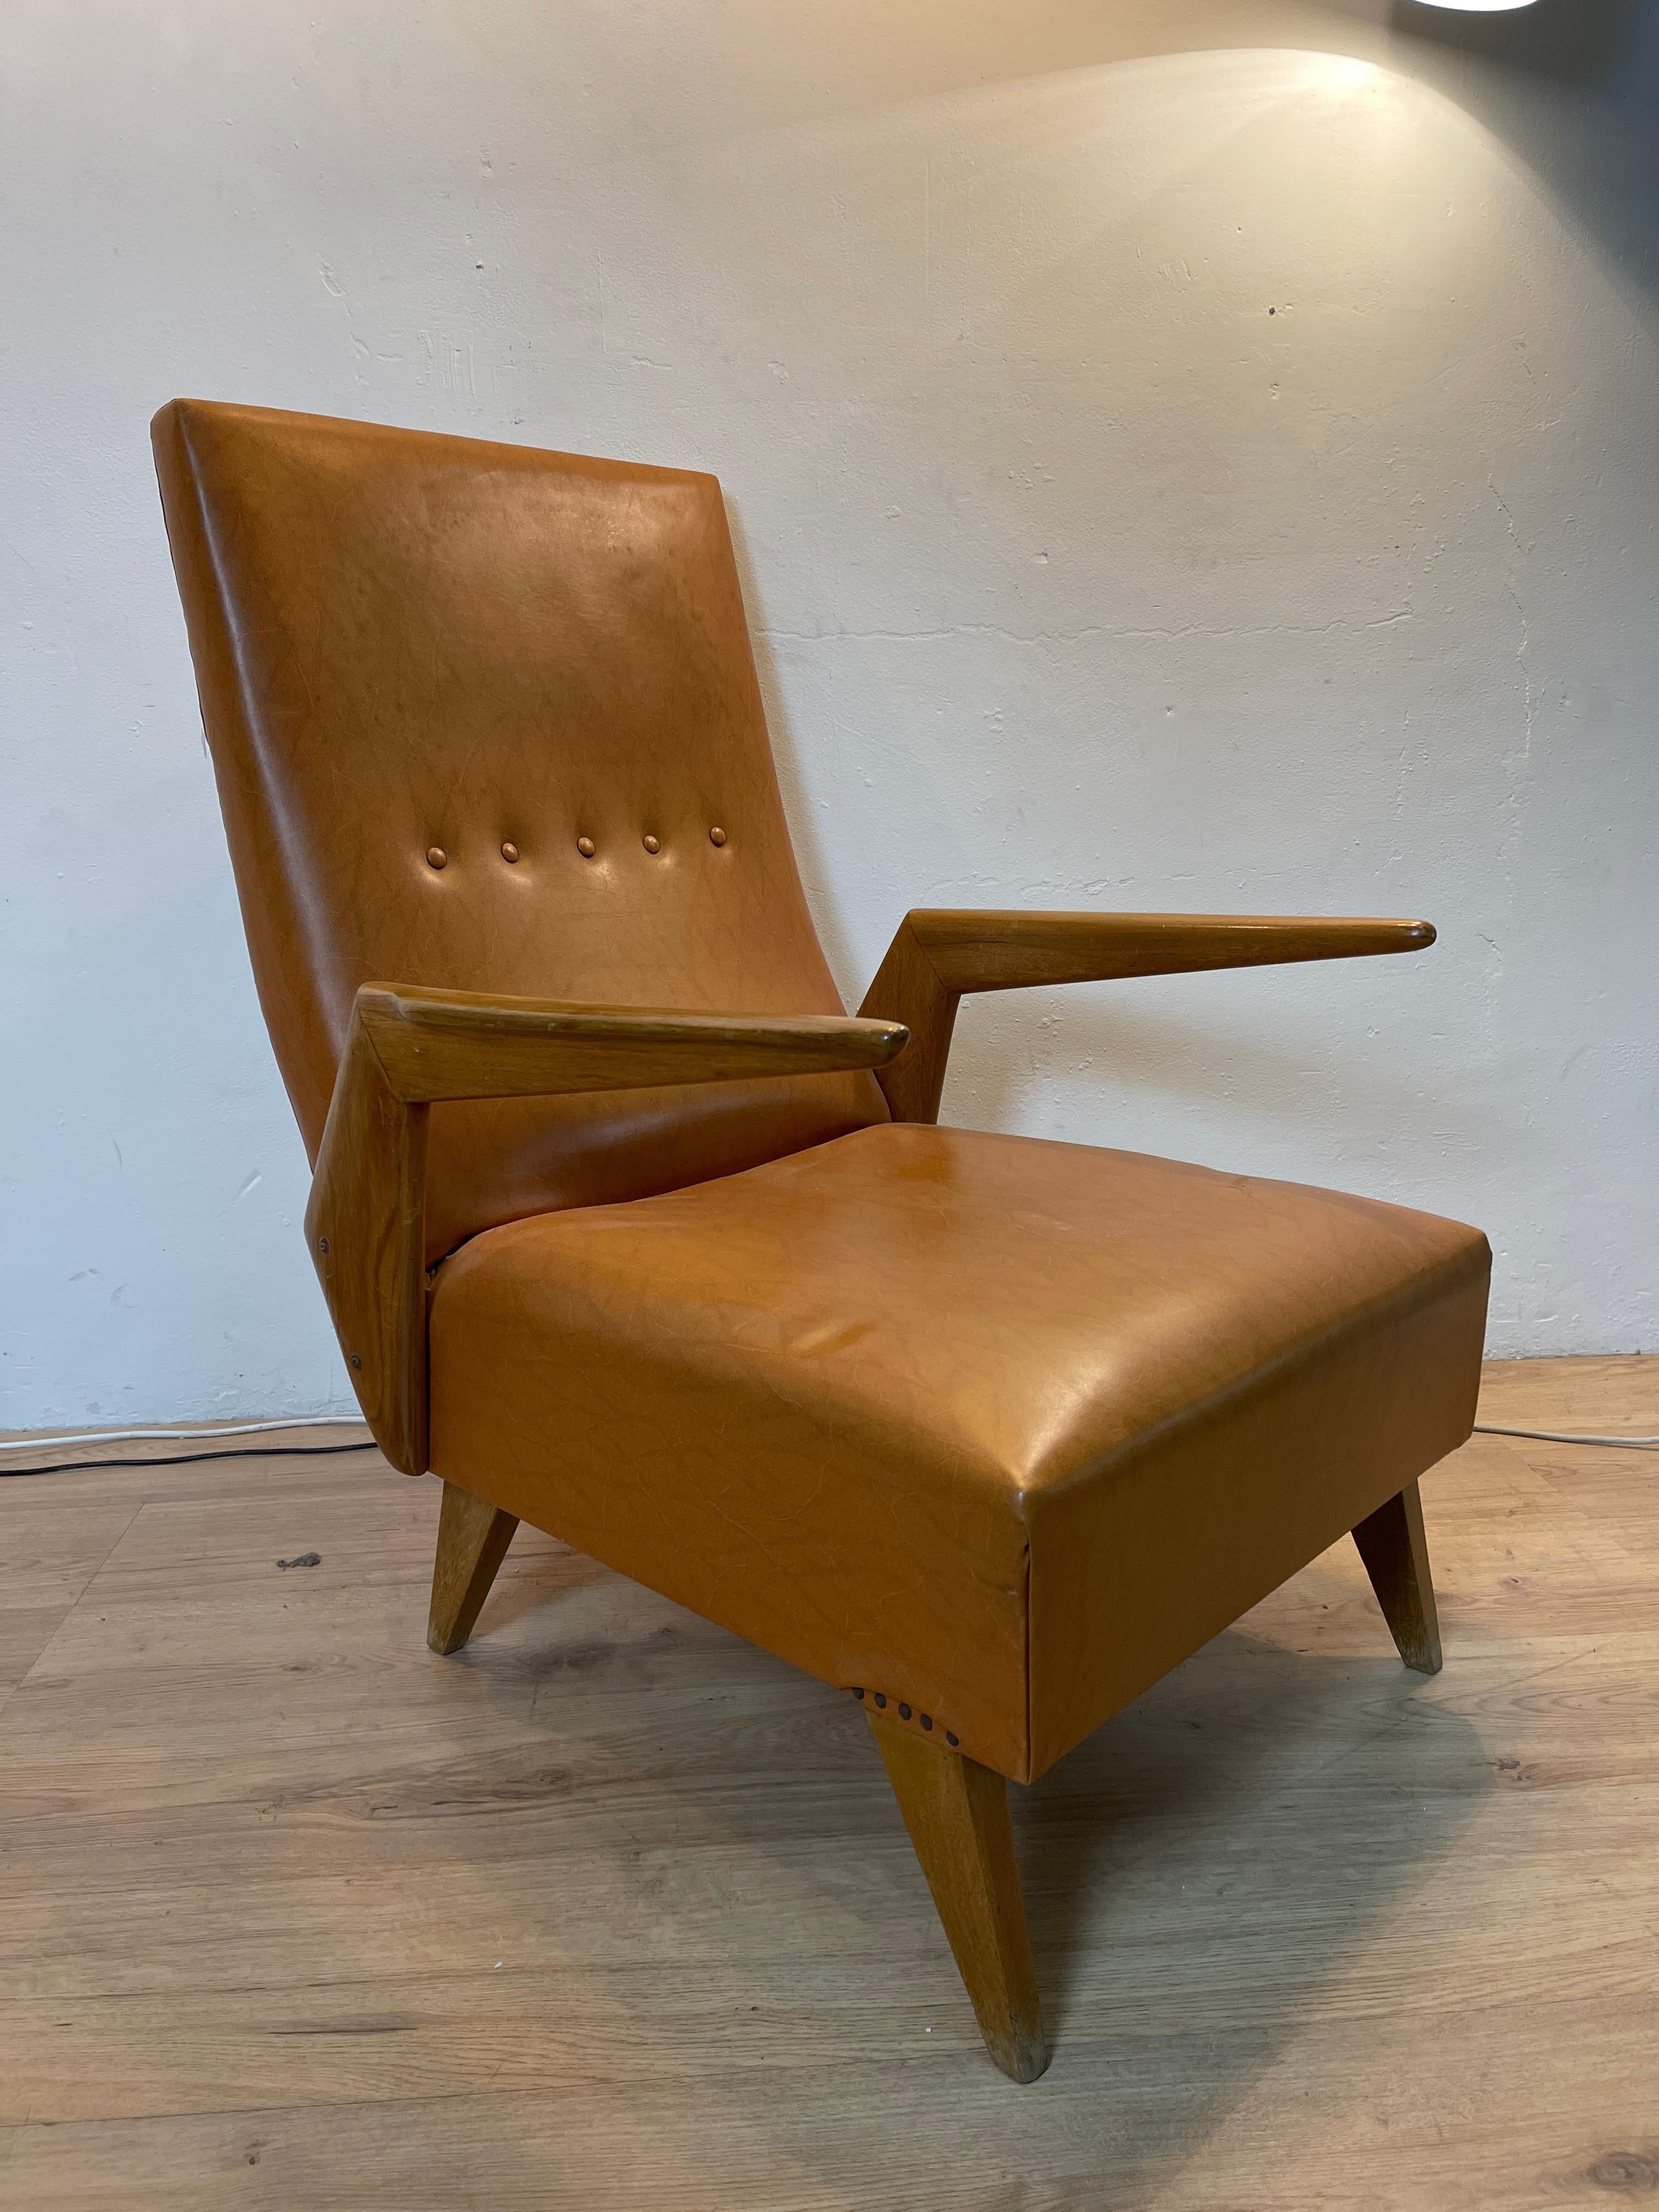 Armchair with a marked Italian design from the 1950s that can be attributed to the famous Italian designer Vittorio Dassi for style, model and construction.